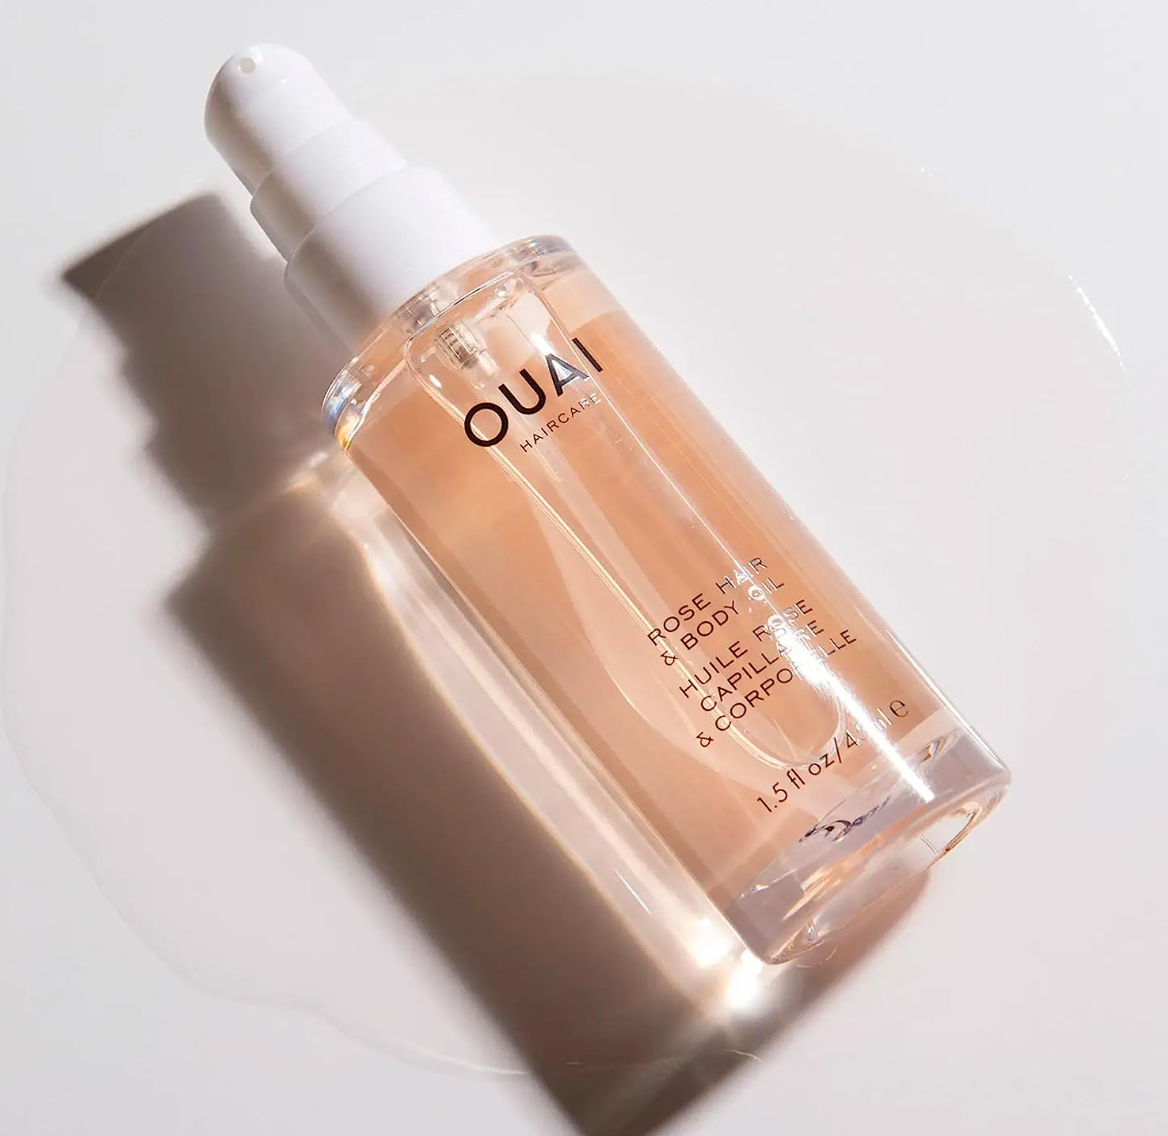 OUAI Rose Hair & Body Oil. A Luxurious, Multi-Purpose Oil to Hydrate Your Hair and Skin. It’s Fast-Absorbing and Scented with Rose and Bergamot. Free from Parabens, Sulfates and Phthalates (3 Oz)